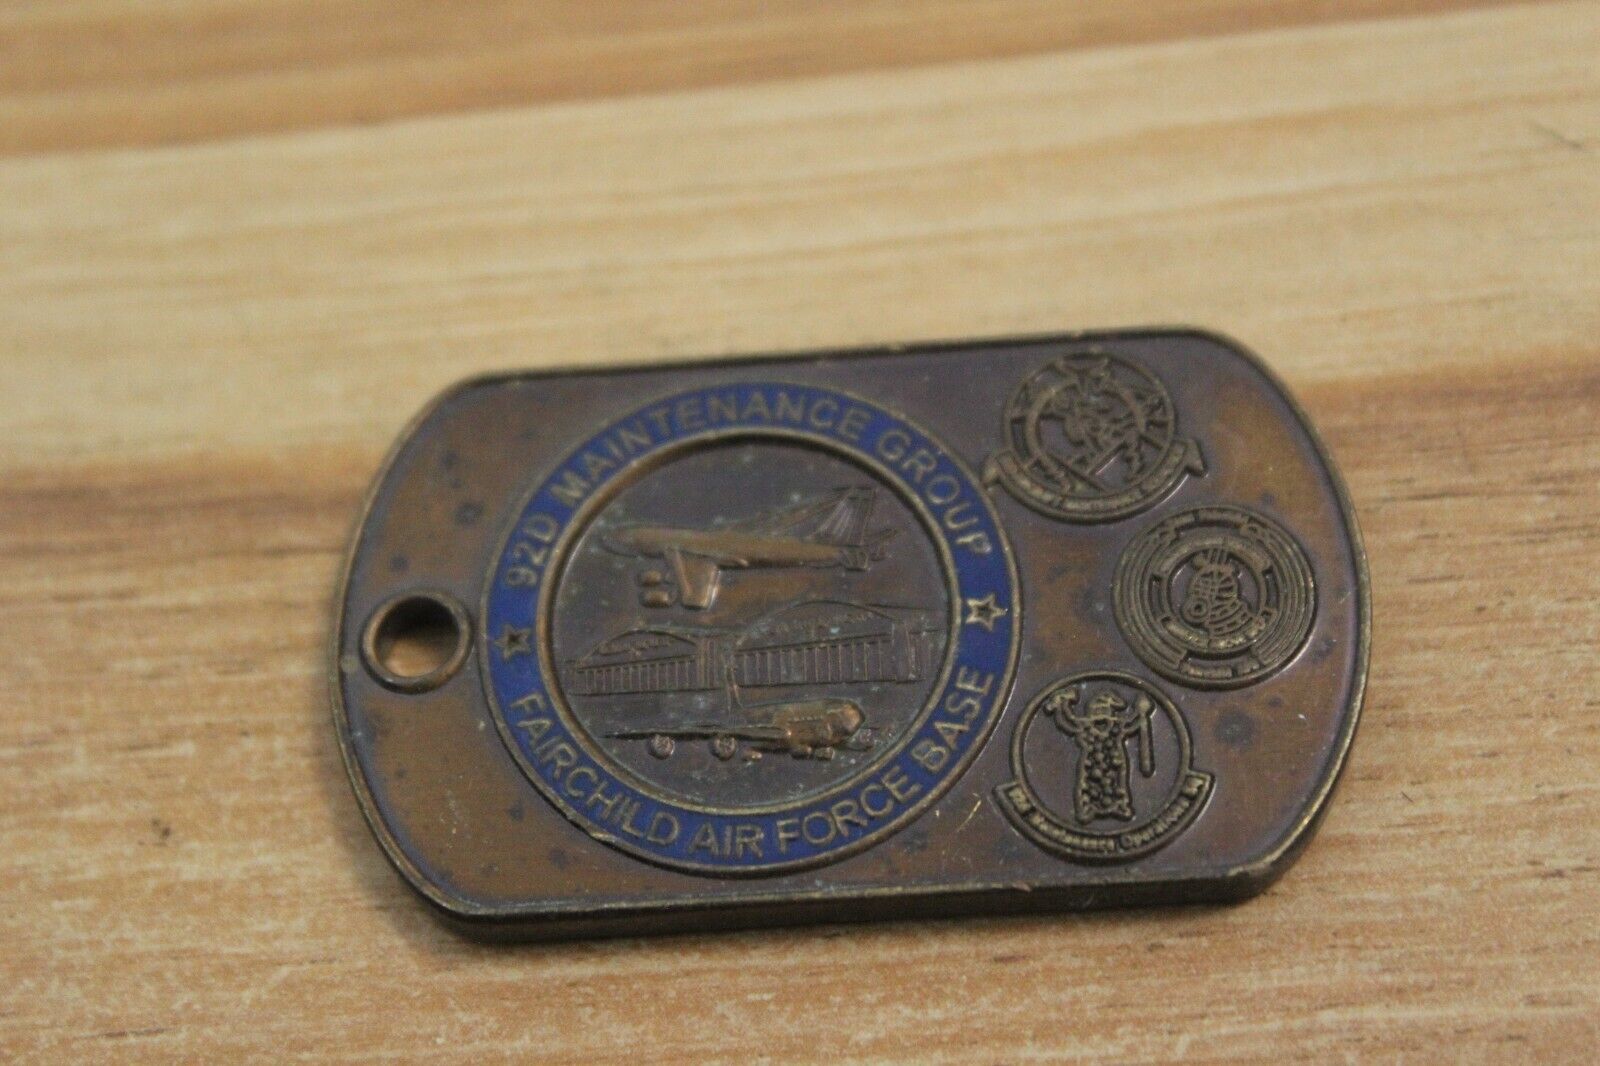 USAF Air Force 92d Maintenance Group Challenge Coin